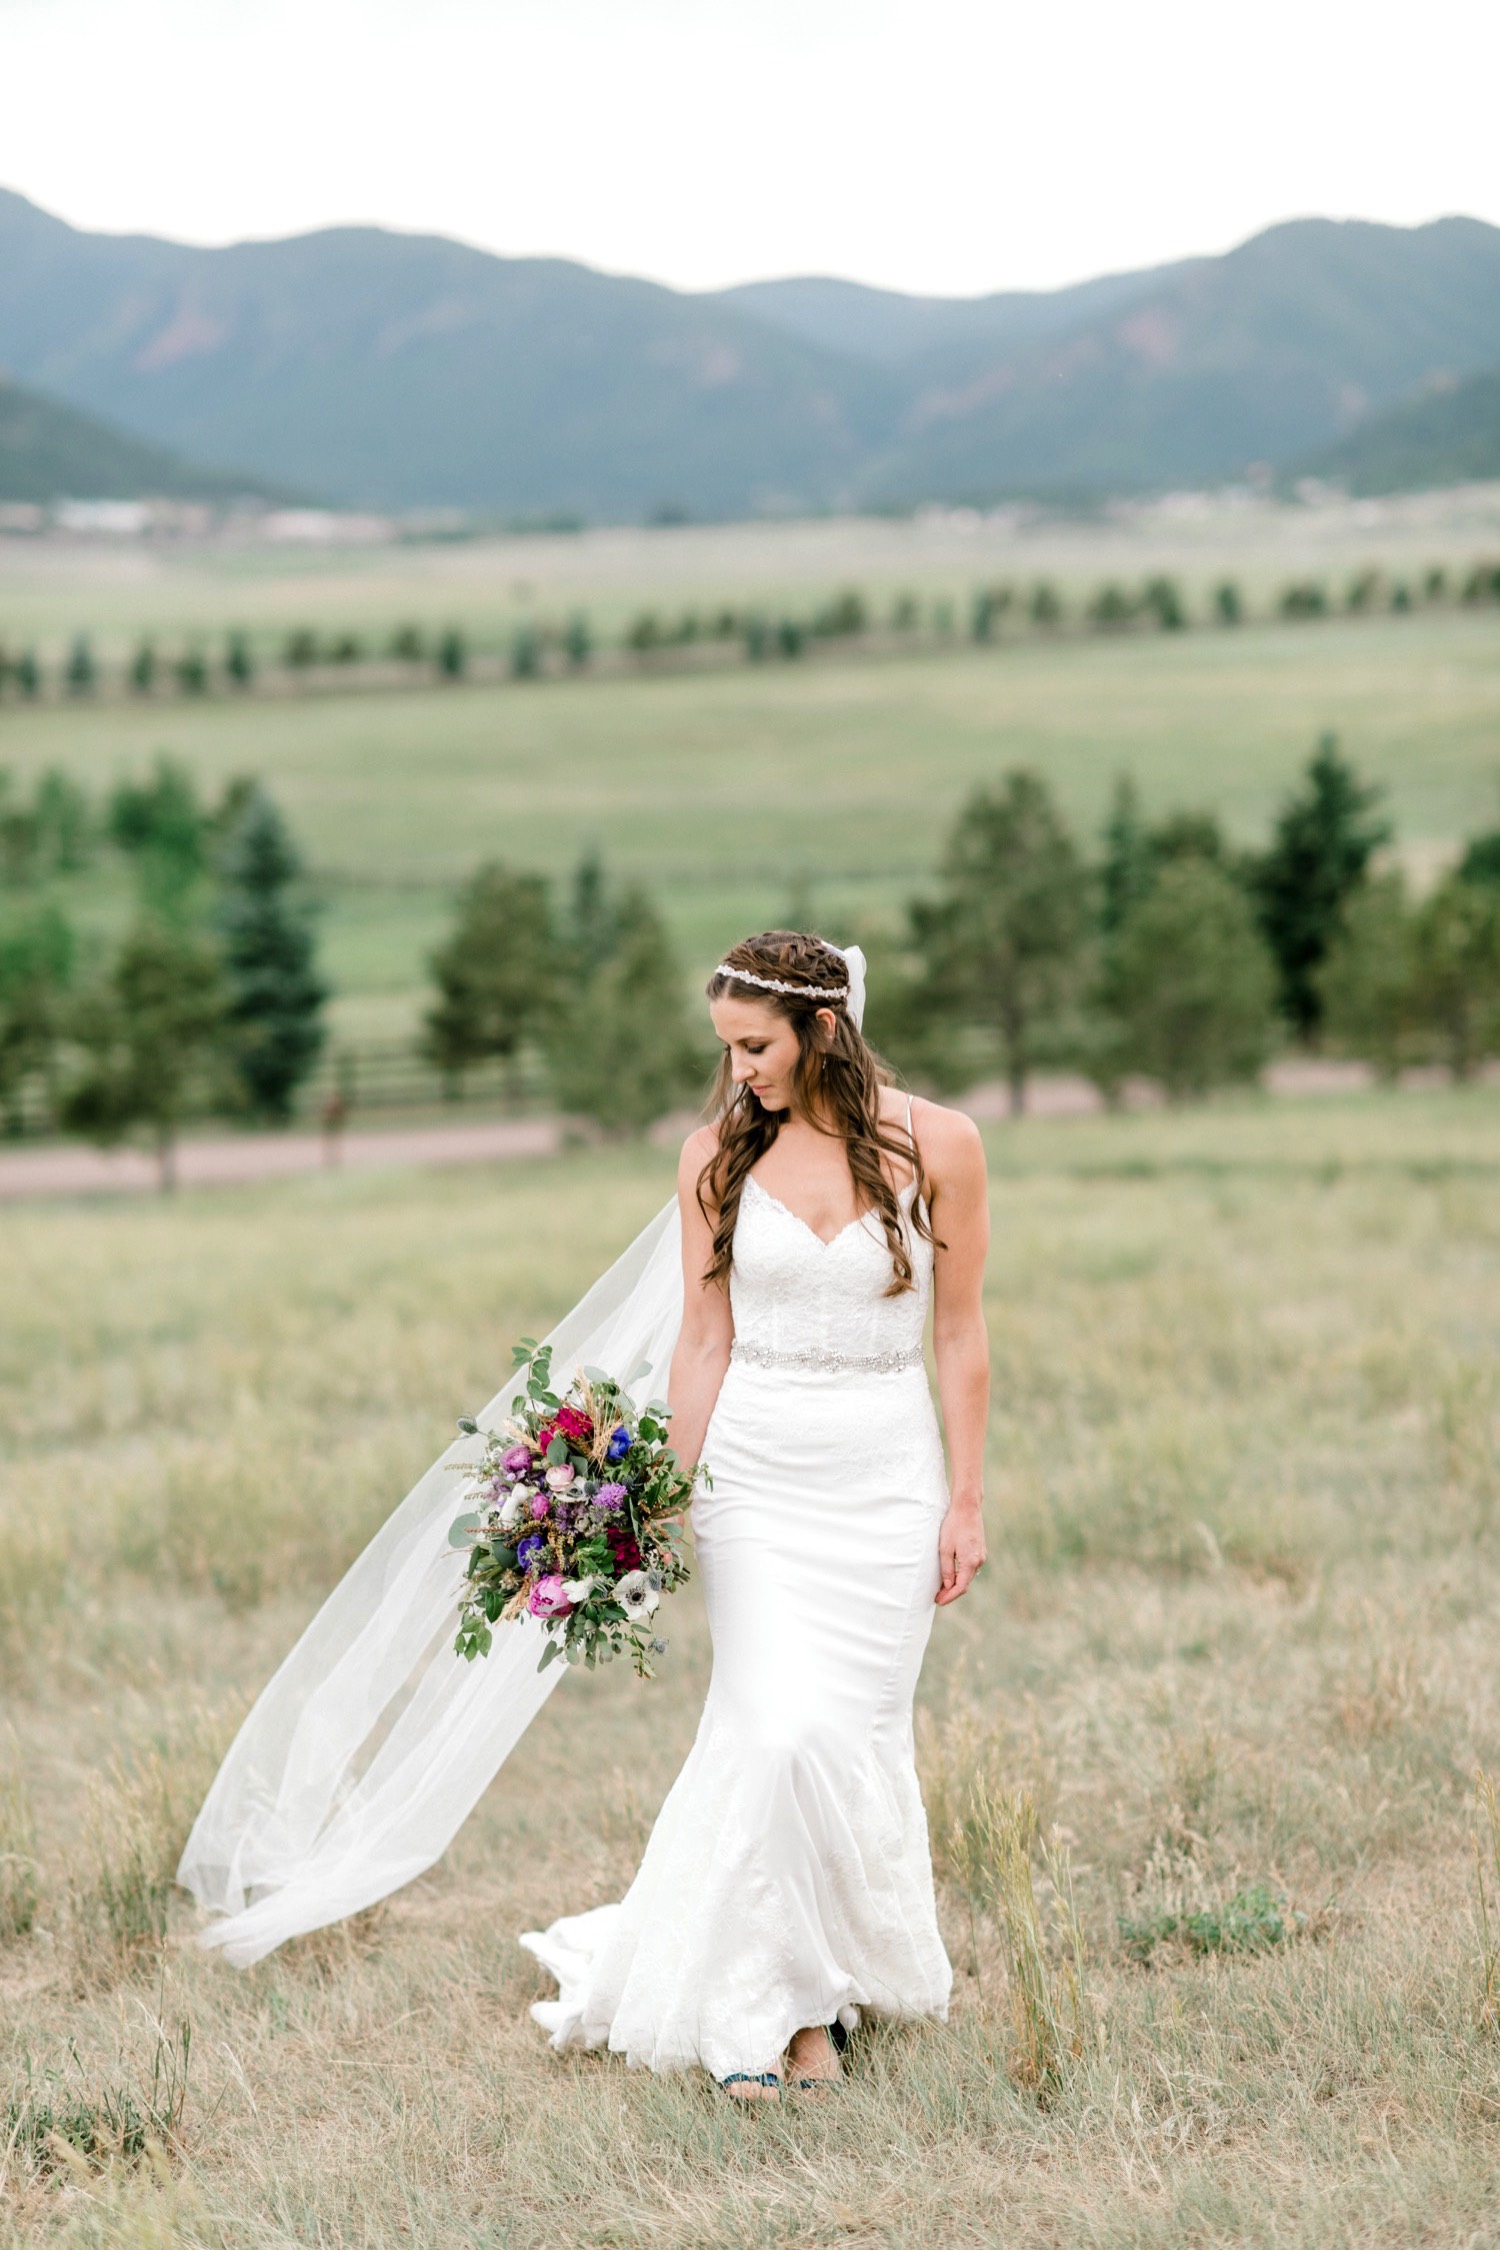 Kristen, the bride, poses for her bridal portrait at Spruce Mountain Ranch in Larkspur, Colorado.